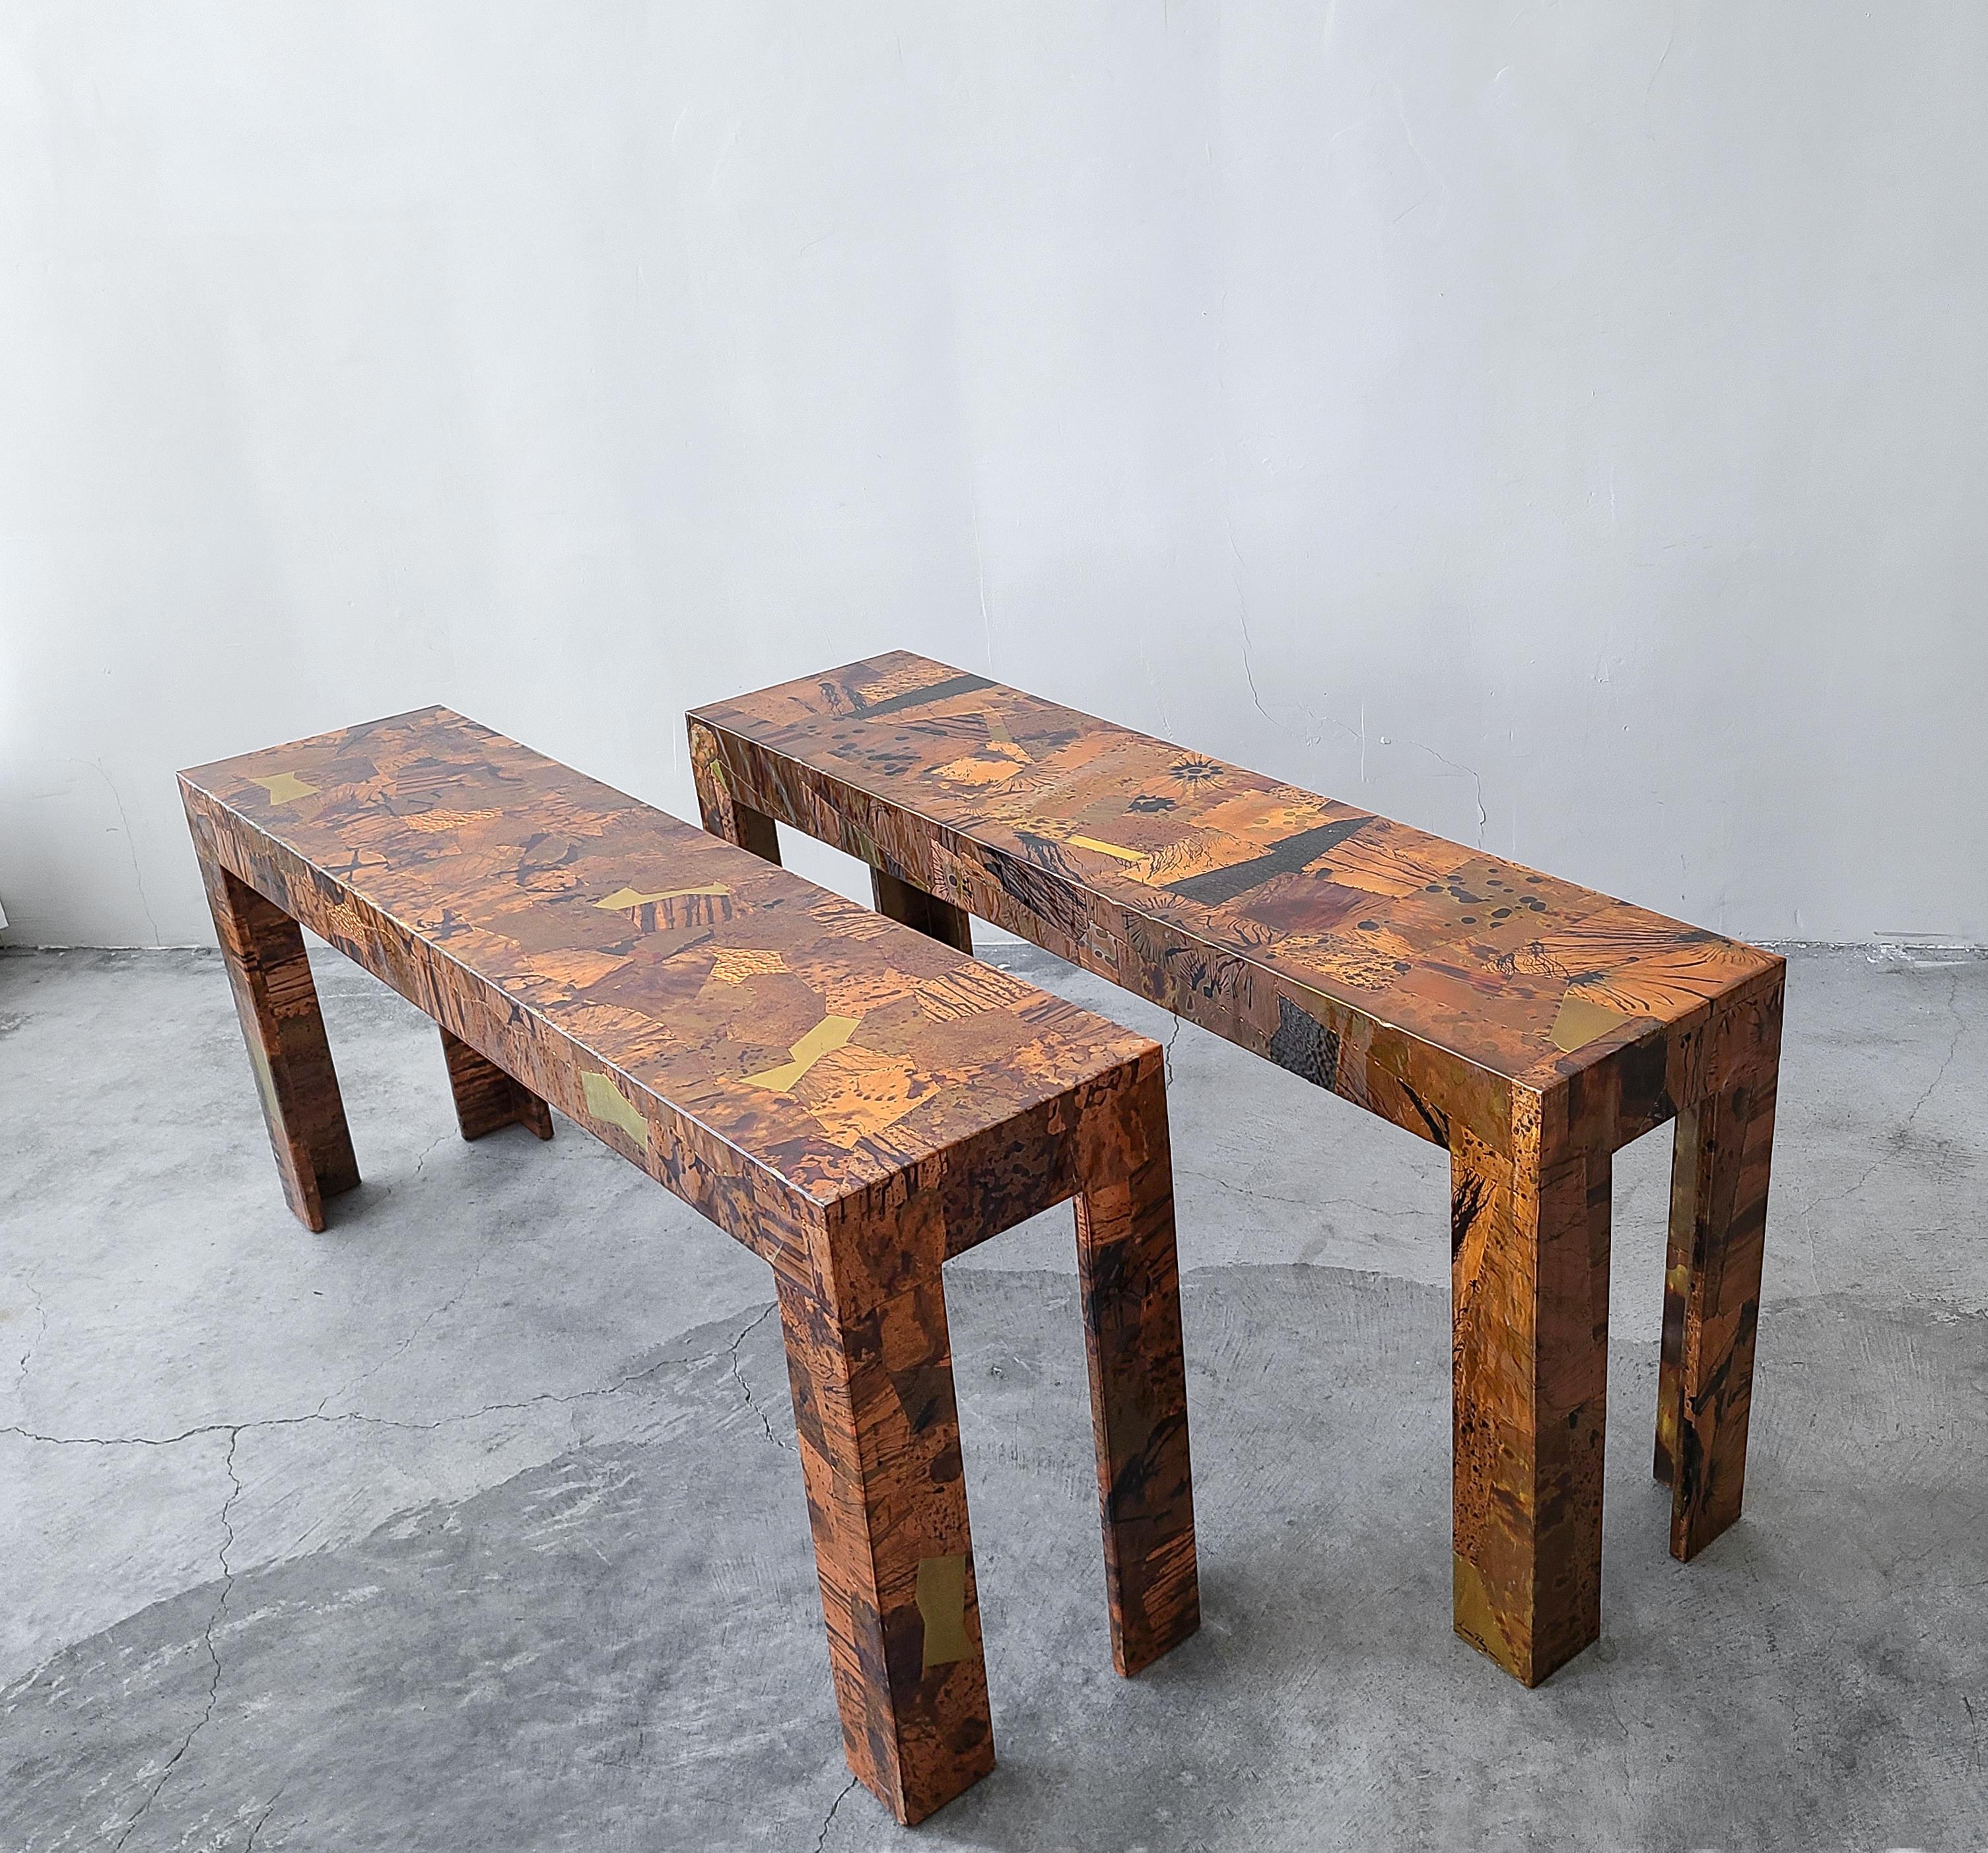 Great pair of 1970s Parsons style console tables in lacquered patchwork copper. Artist-signed.

Tables are in great shape overall with minimal wear from use. Small area of cracked lacquer on one table. See last image.

Willing to separate.